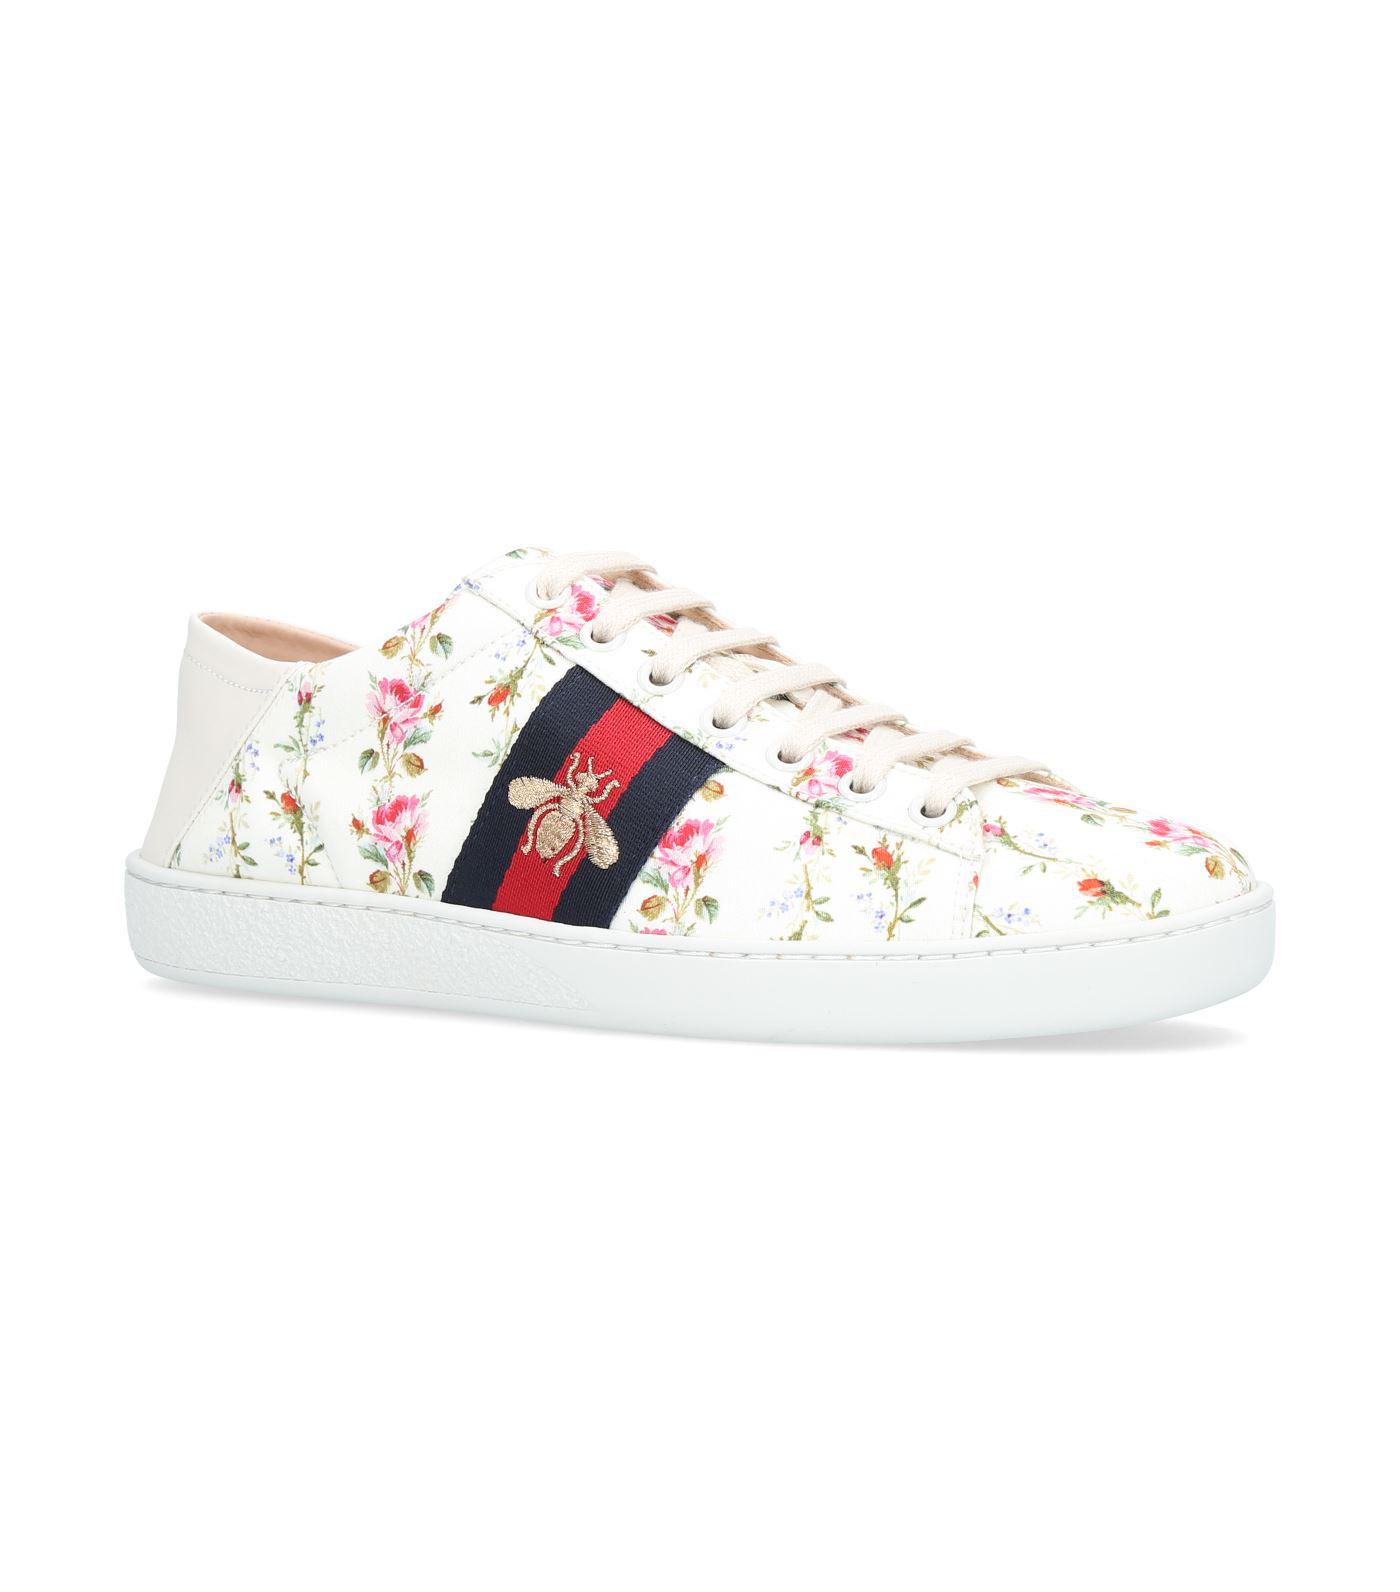 Gucci Rose Print Low-top Sneakers in White Lyst